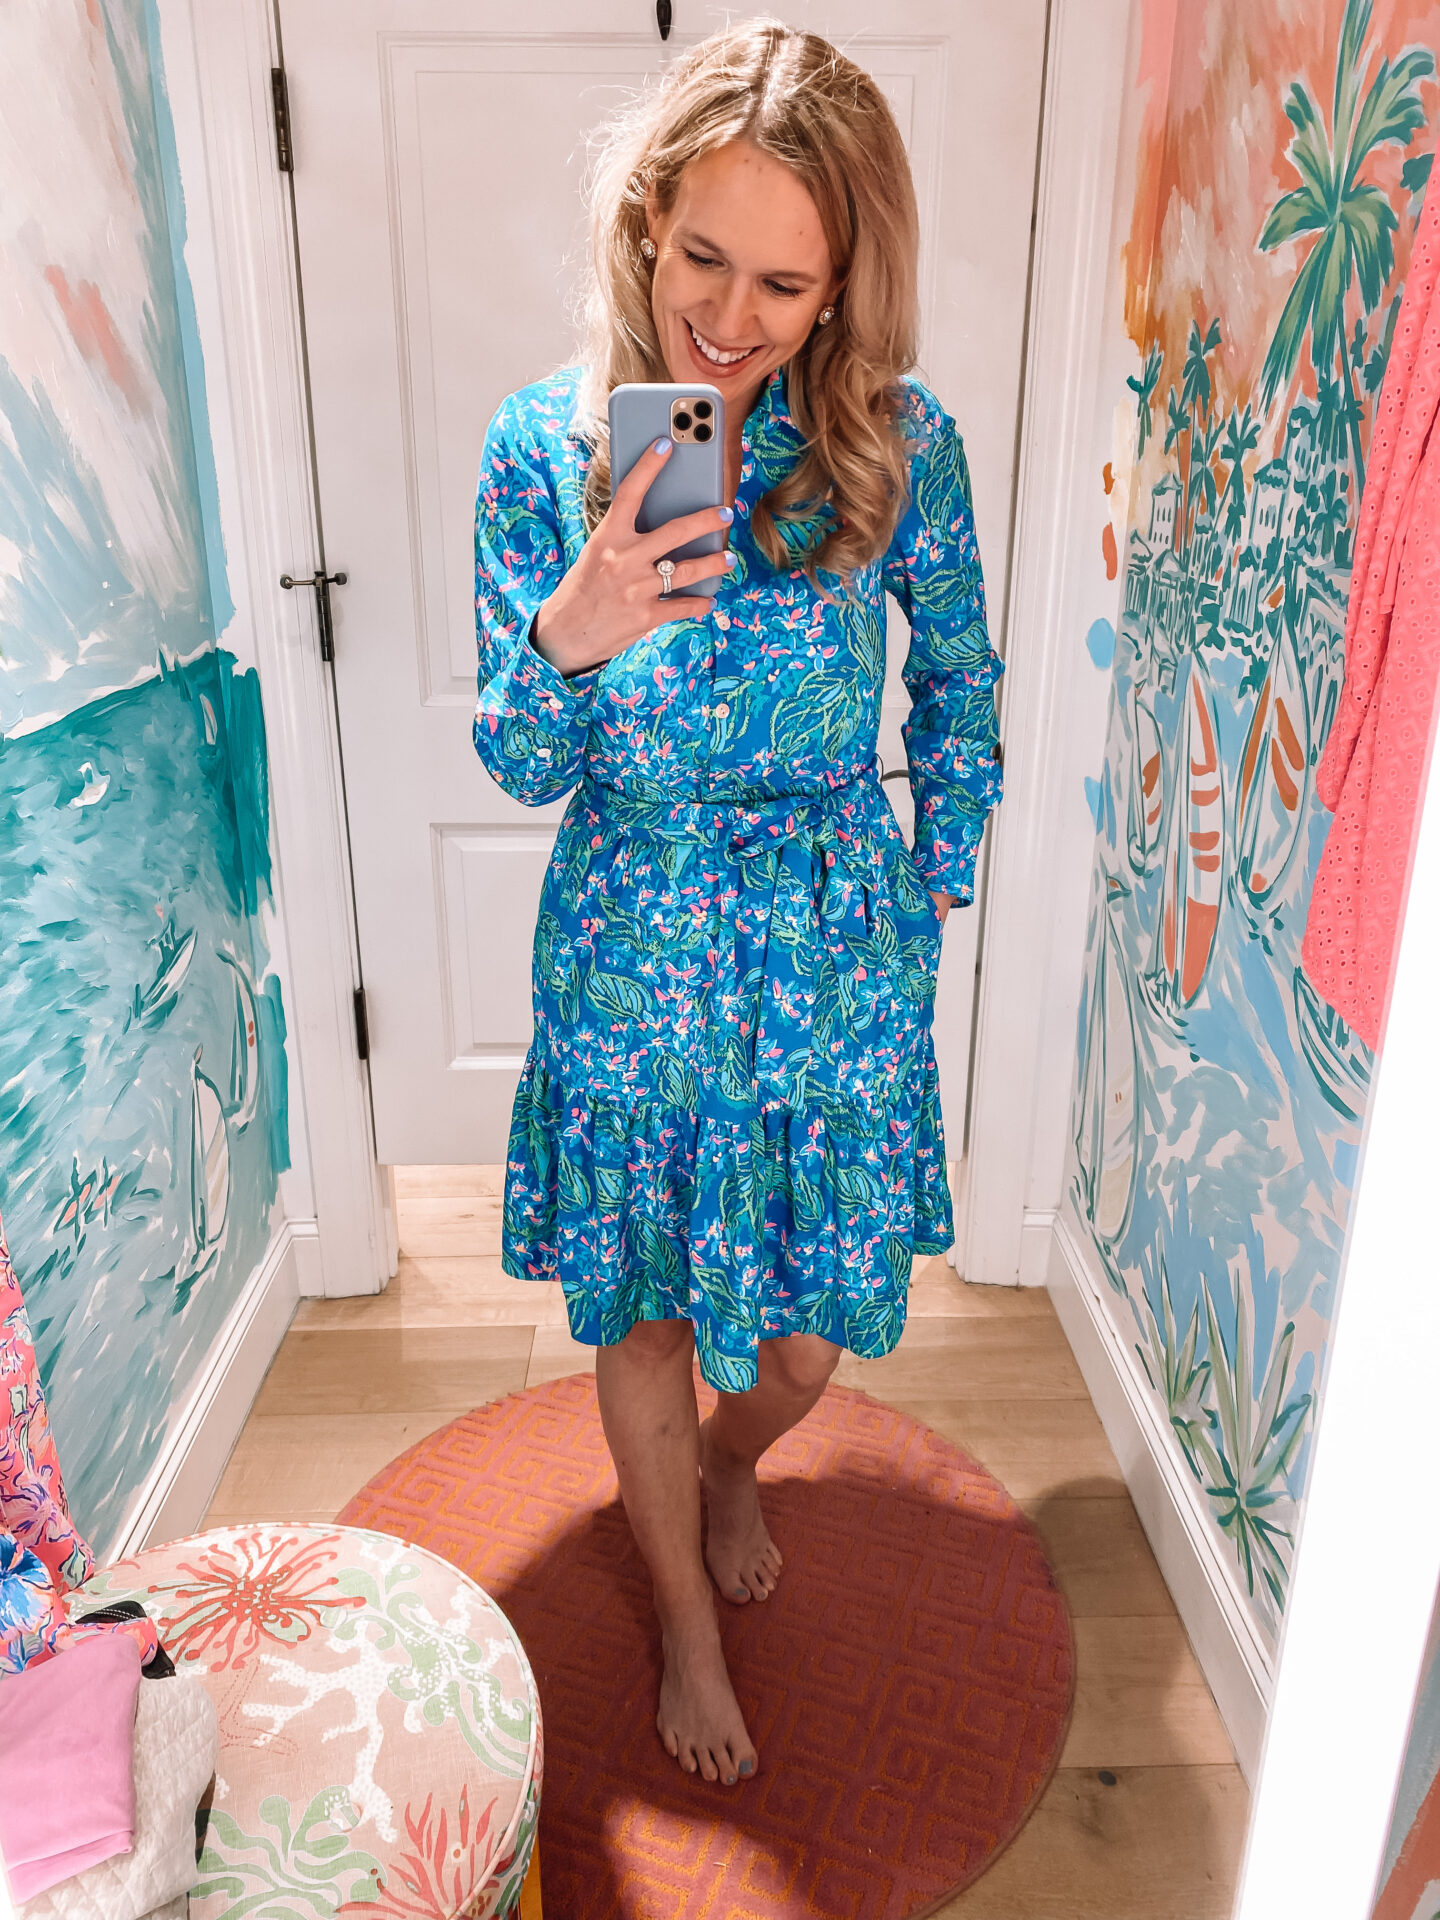 Lilly Sunshine Sale dates, details and TONS of predictions to help prepare you for the semi-annual Lilly Pulitzer Sale that will begin on September 12th!